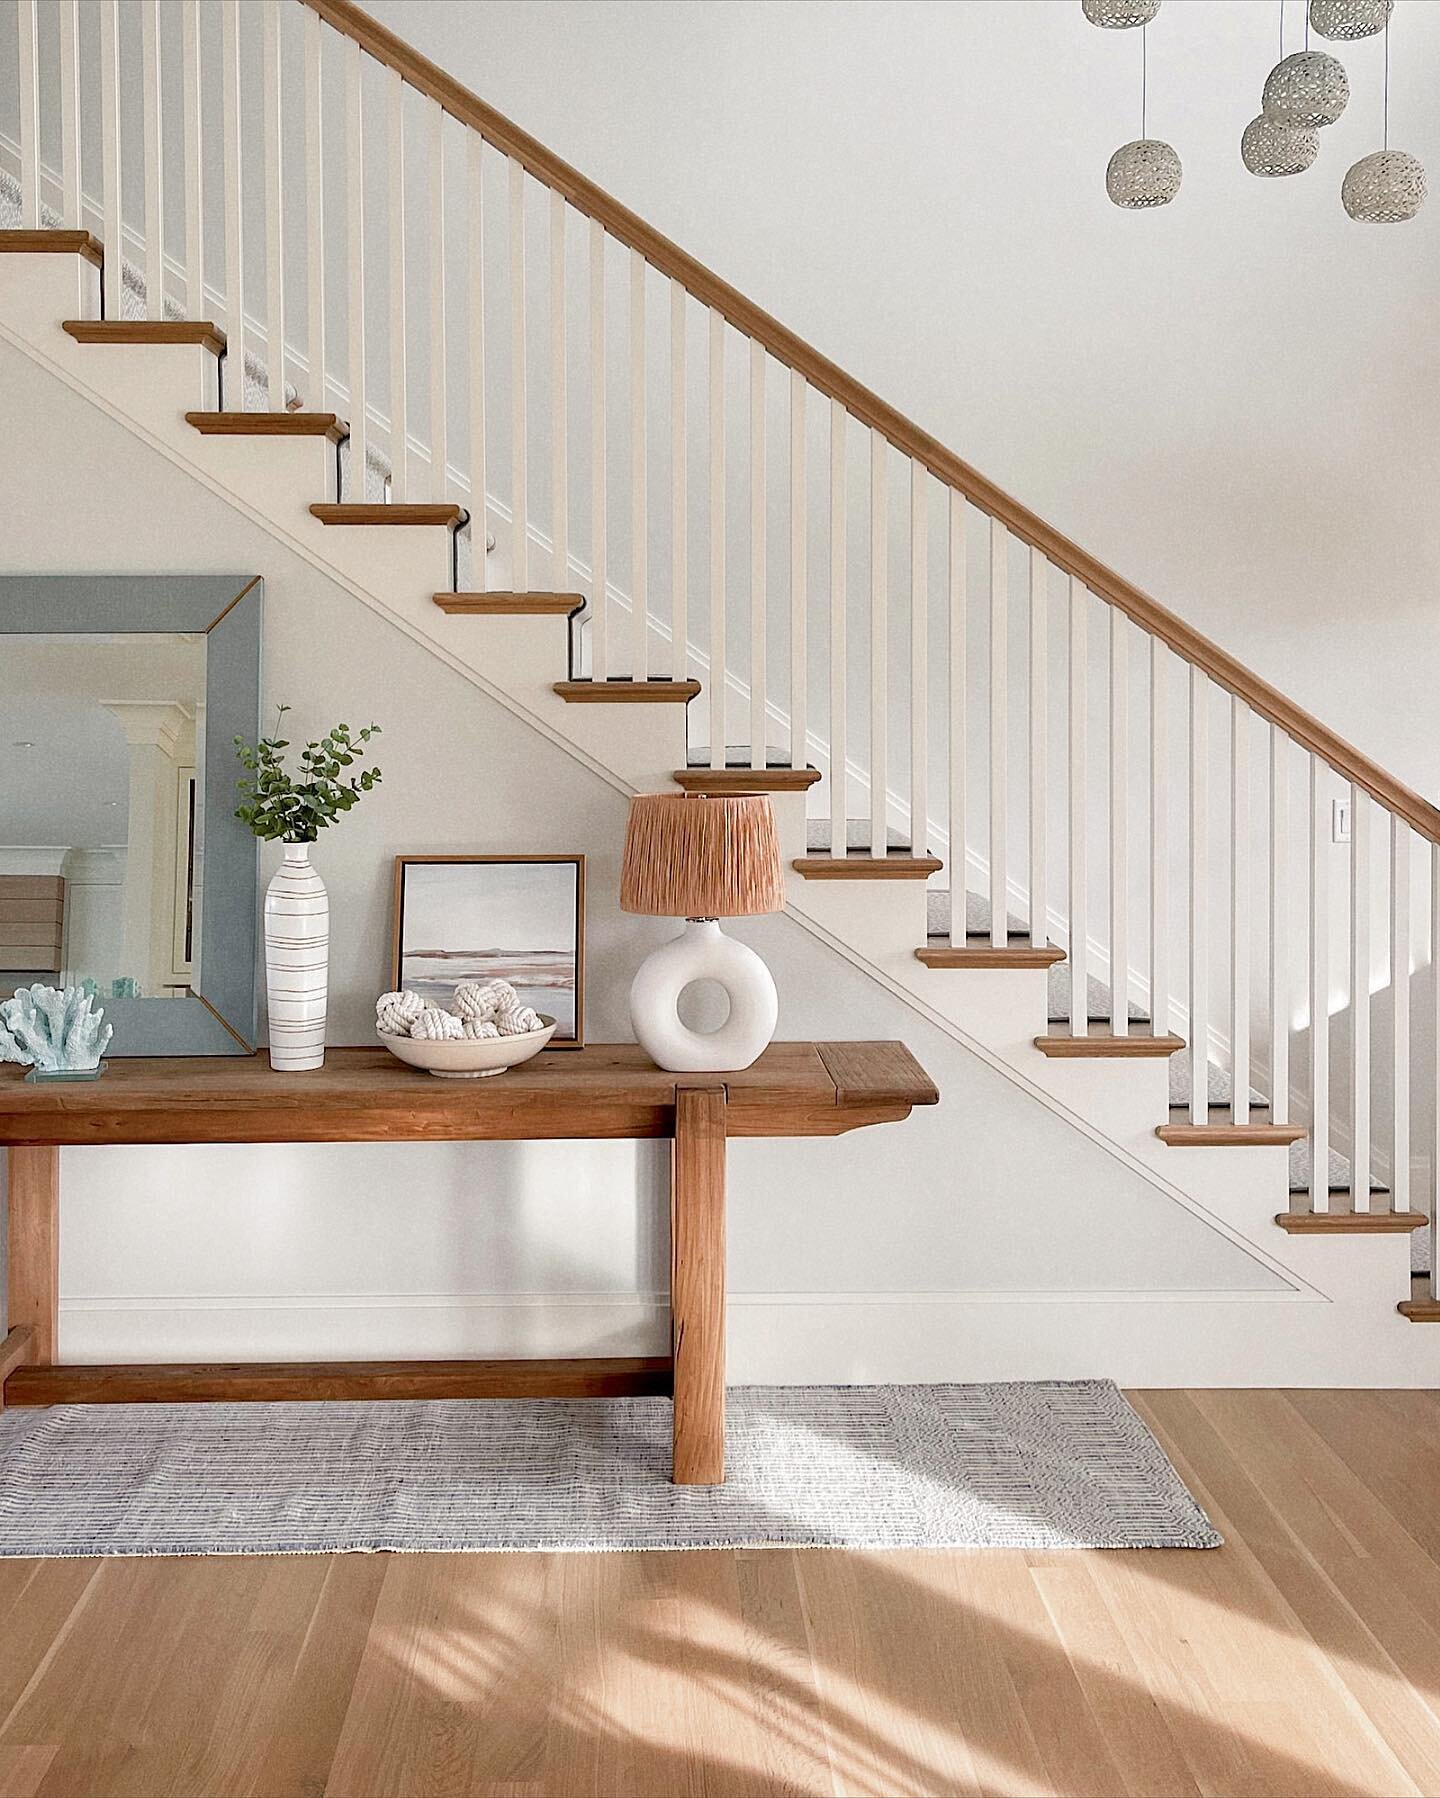 Coastal-traditional stairs with a white oak rail &amp; treads and painted poplar balusters and at the #RiverView project.

Builder: @horanbuilding 

#interiors #interiorarchitecture #interiordesign #naturallight #coastalcottage #cottagedecor #morning